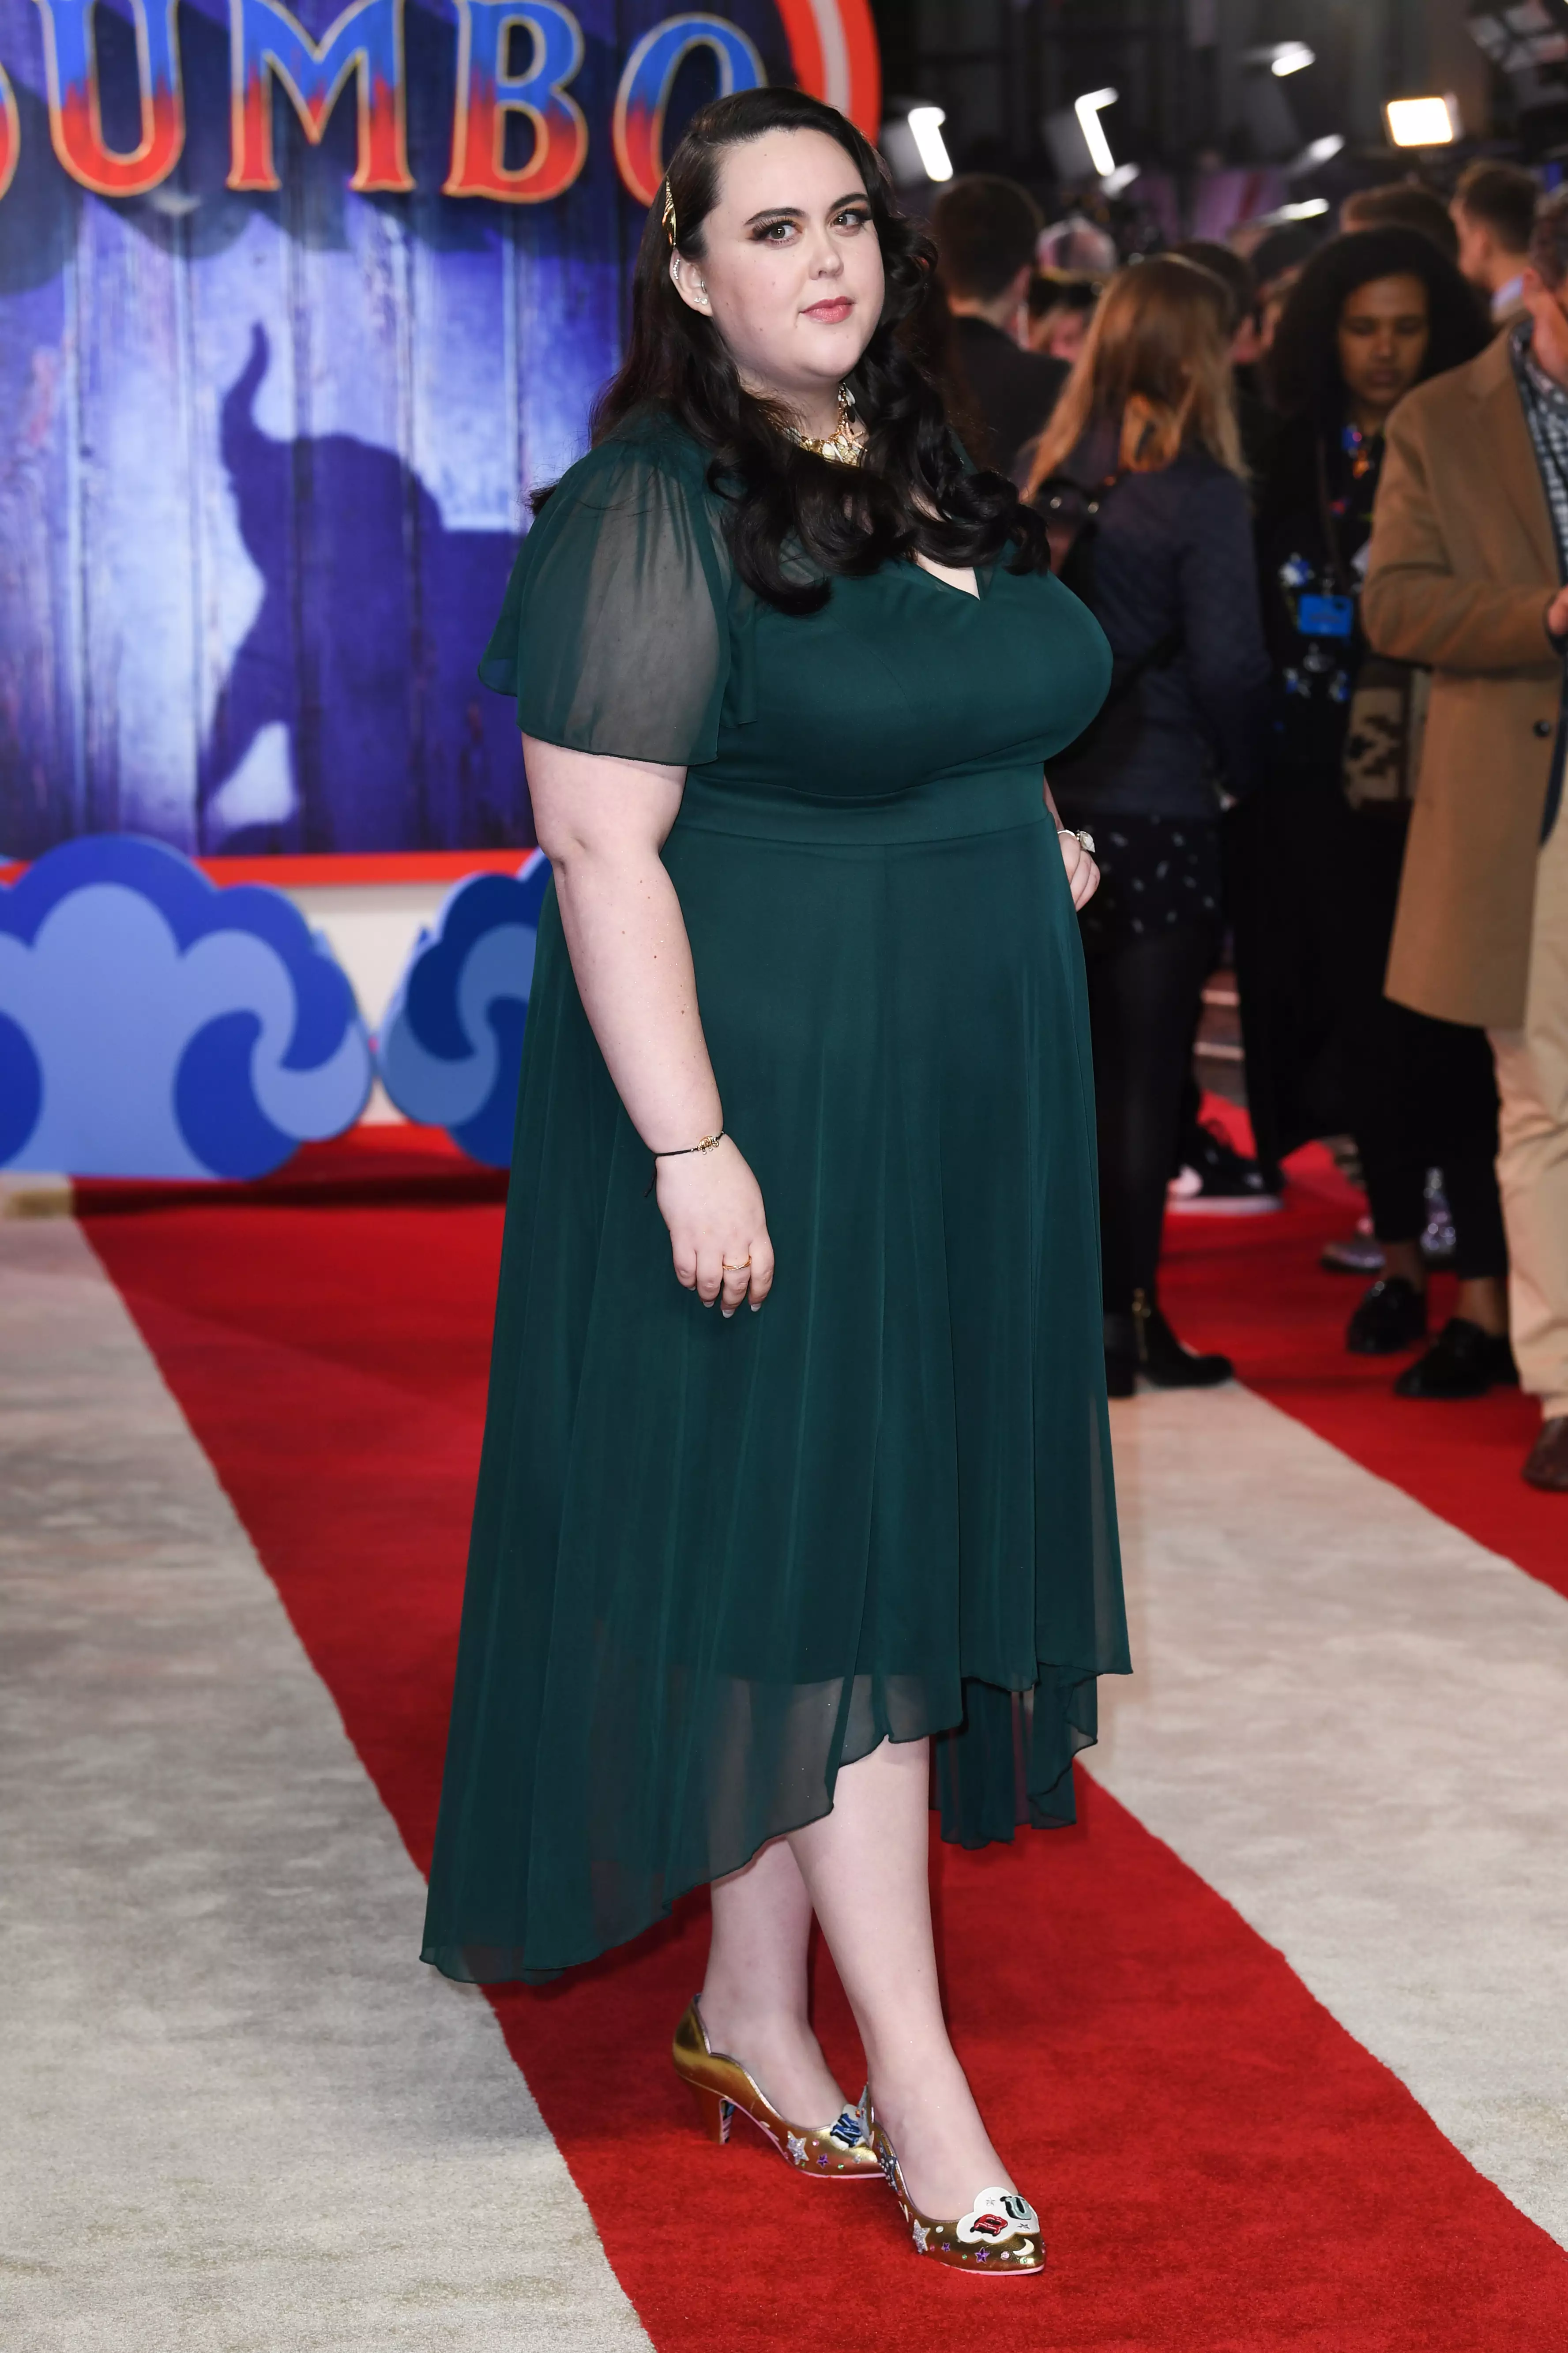 Sharon Rooney from My Mad Fat Diary is starring too (